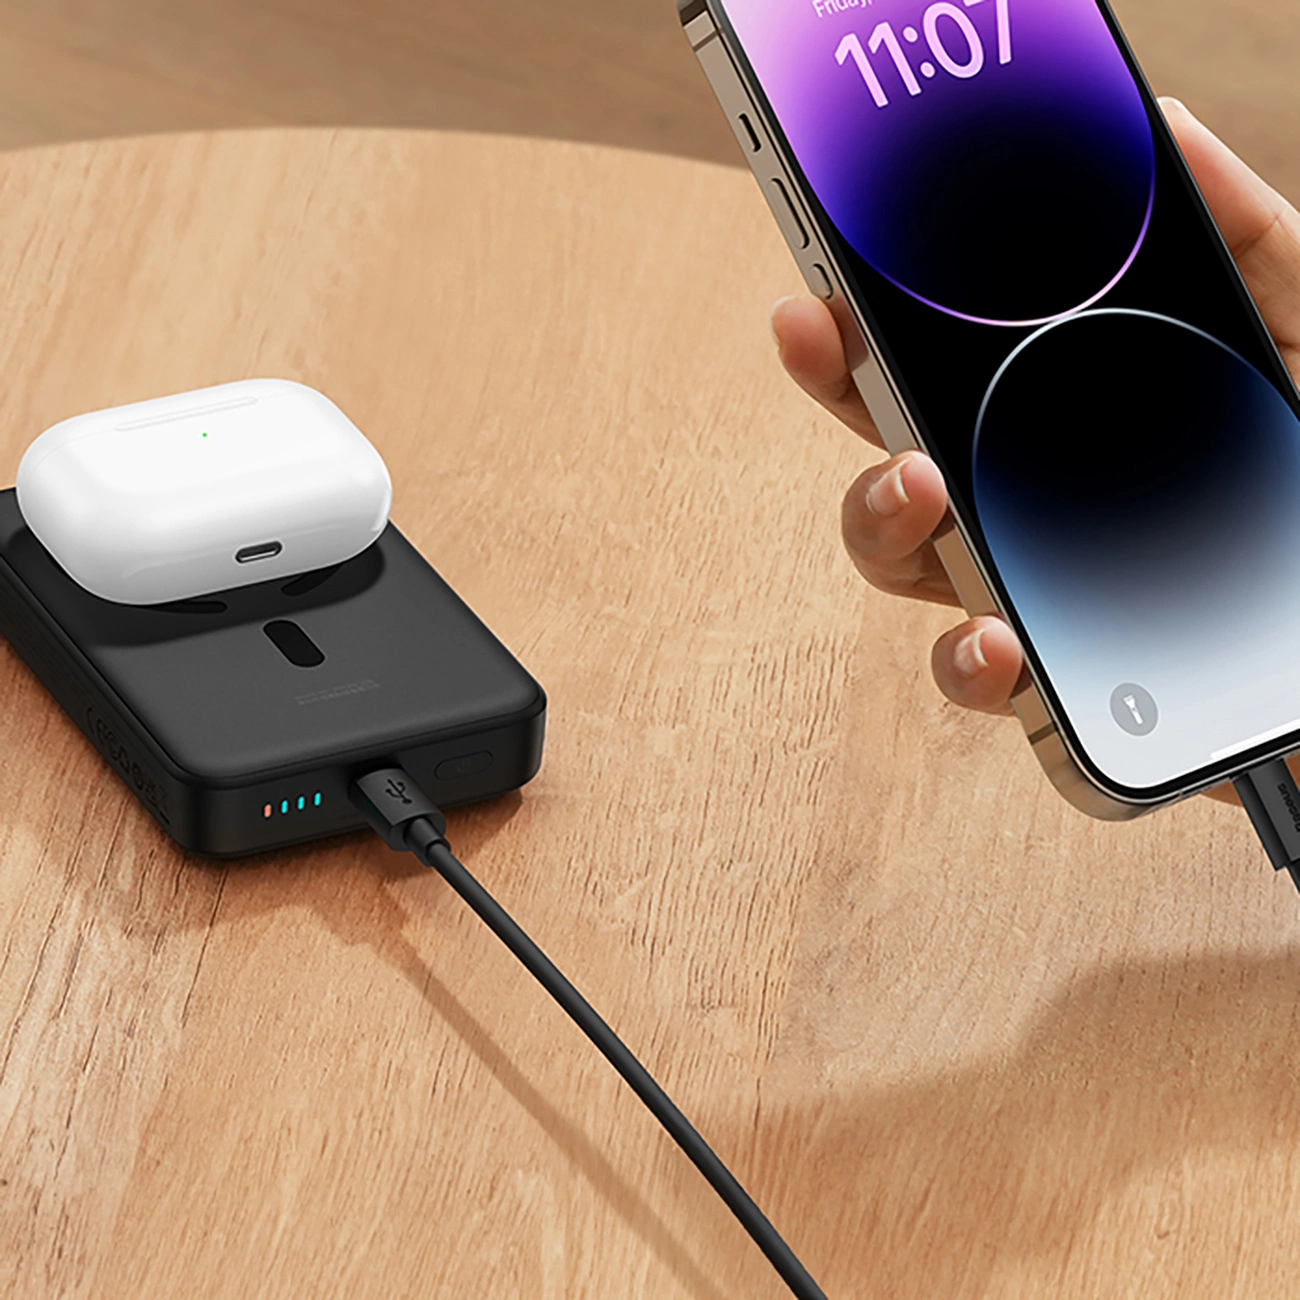 Baseus Magnetic Mini inductive 10000mAh 30W Powerbank lying on a wooden table to which the phone is connected via a cable, and inductively charging headphones lie on the surface of the Baseus Magnetic Mini Powerbank.